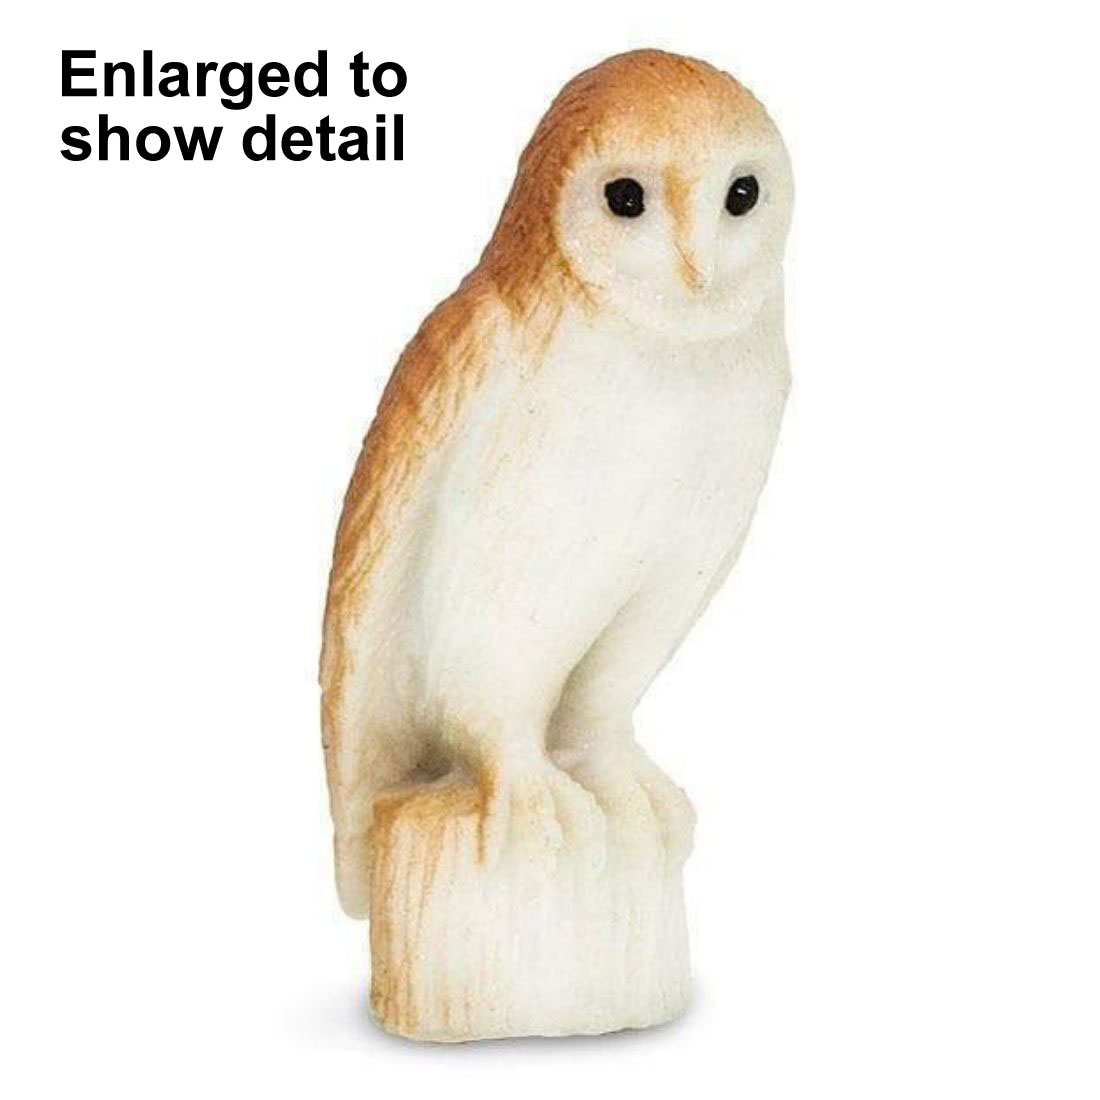 Barn Owl Mini Figurine with the text Enlarged to Show Detail